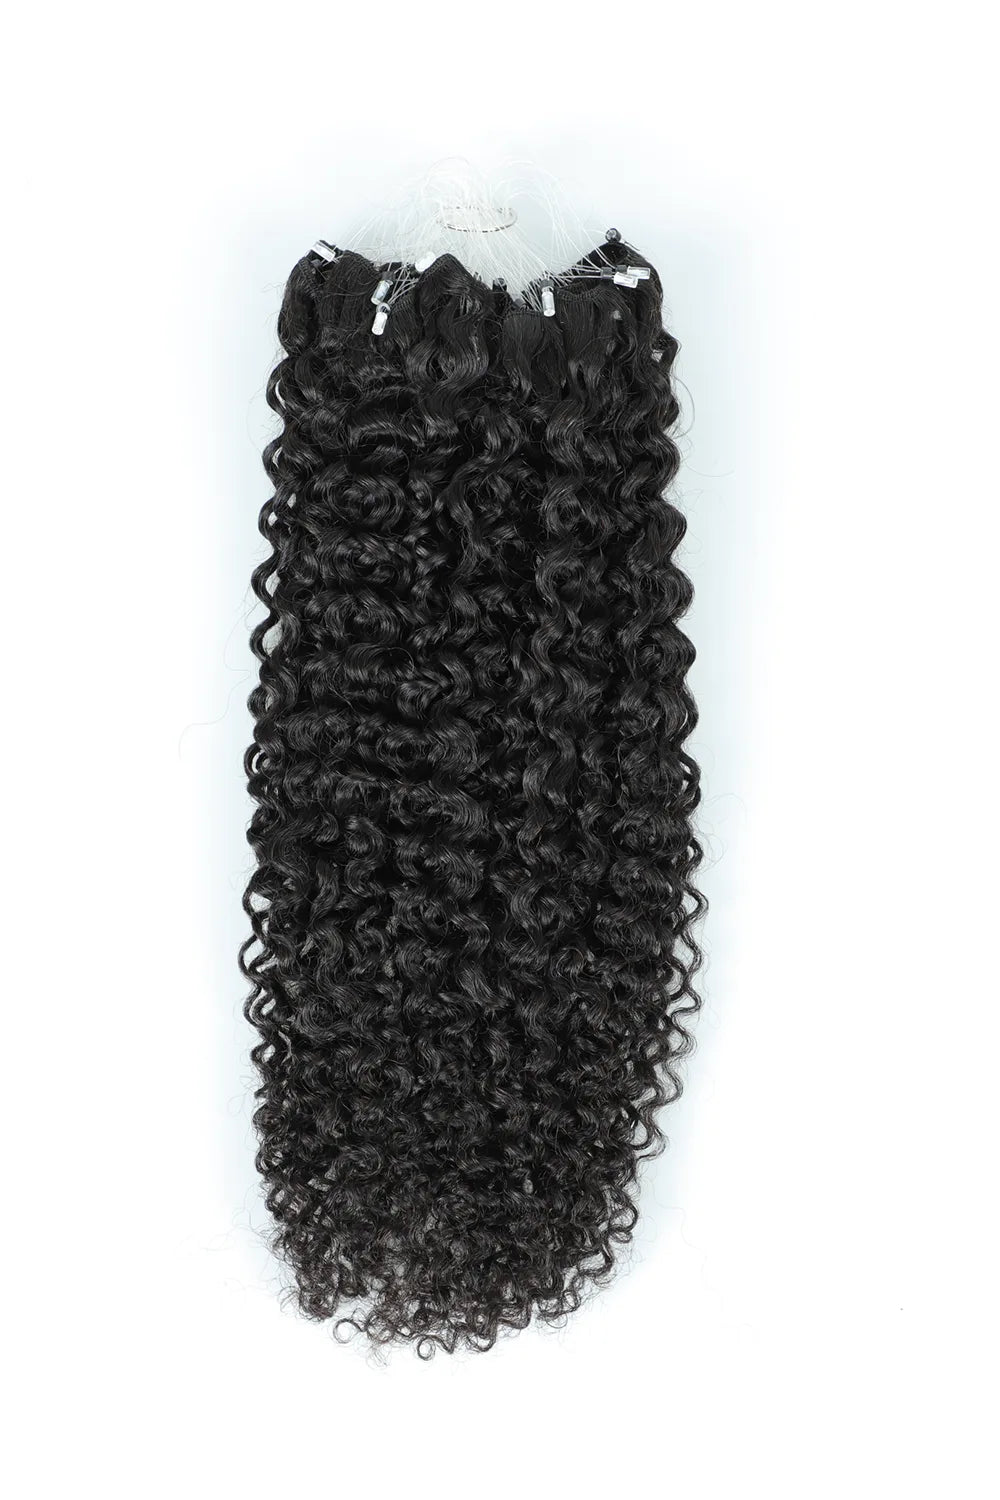 weft-extensions-with-beads-curly-brazilian-virgin-hair-1